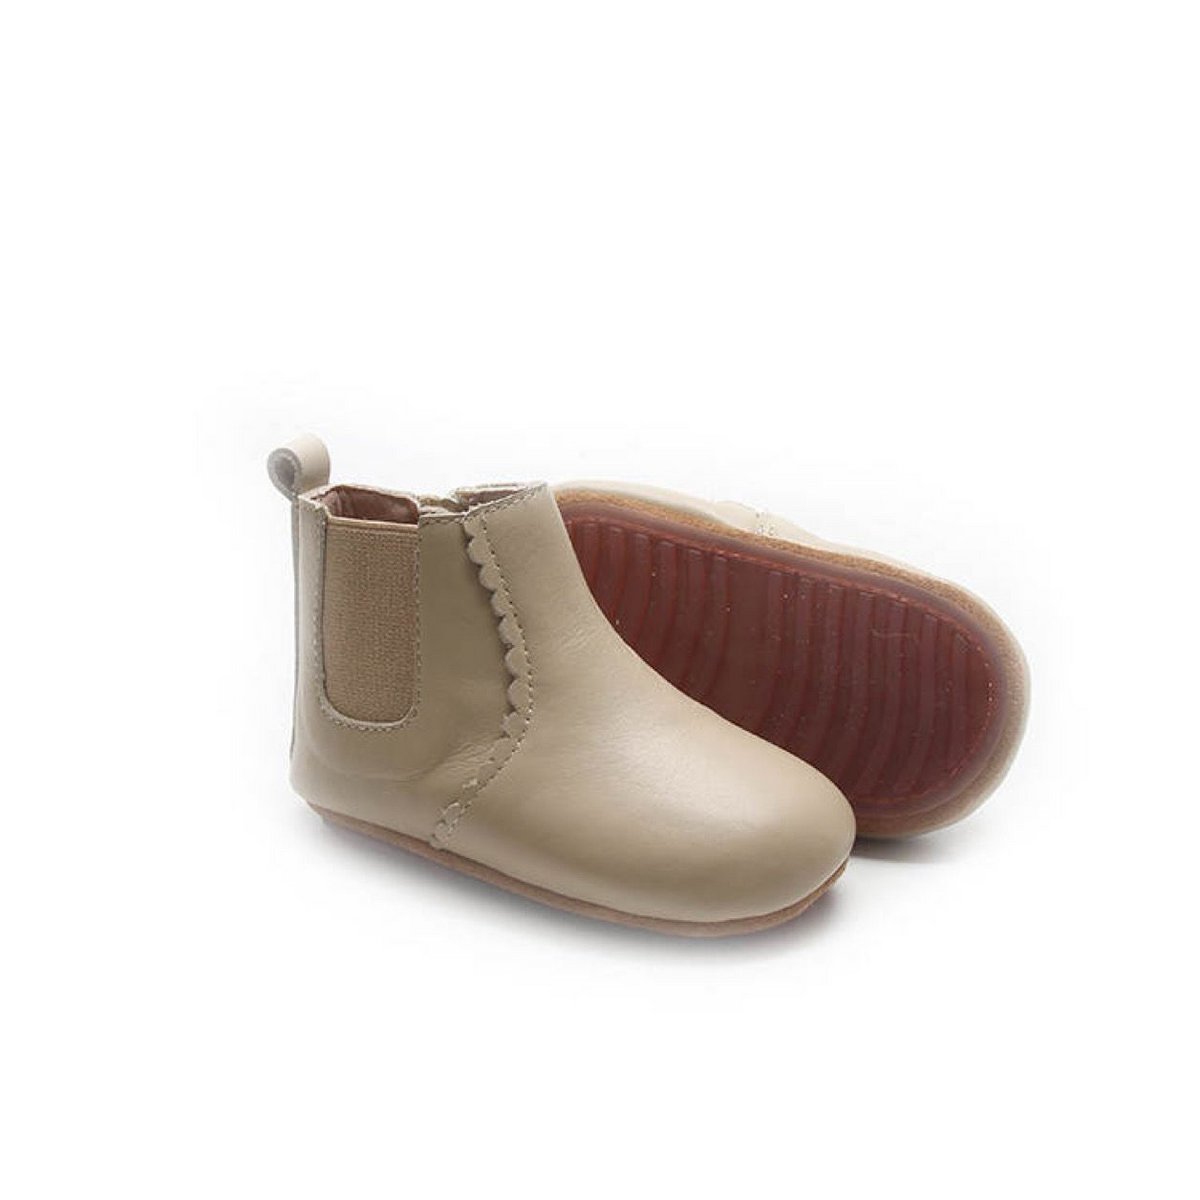 Teddy & James Taupe Chelsea Boots Creme